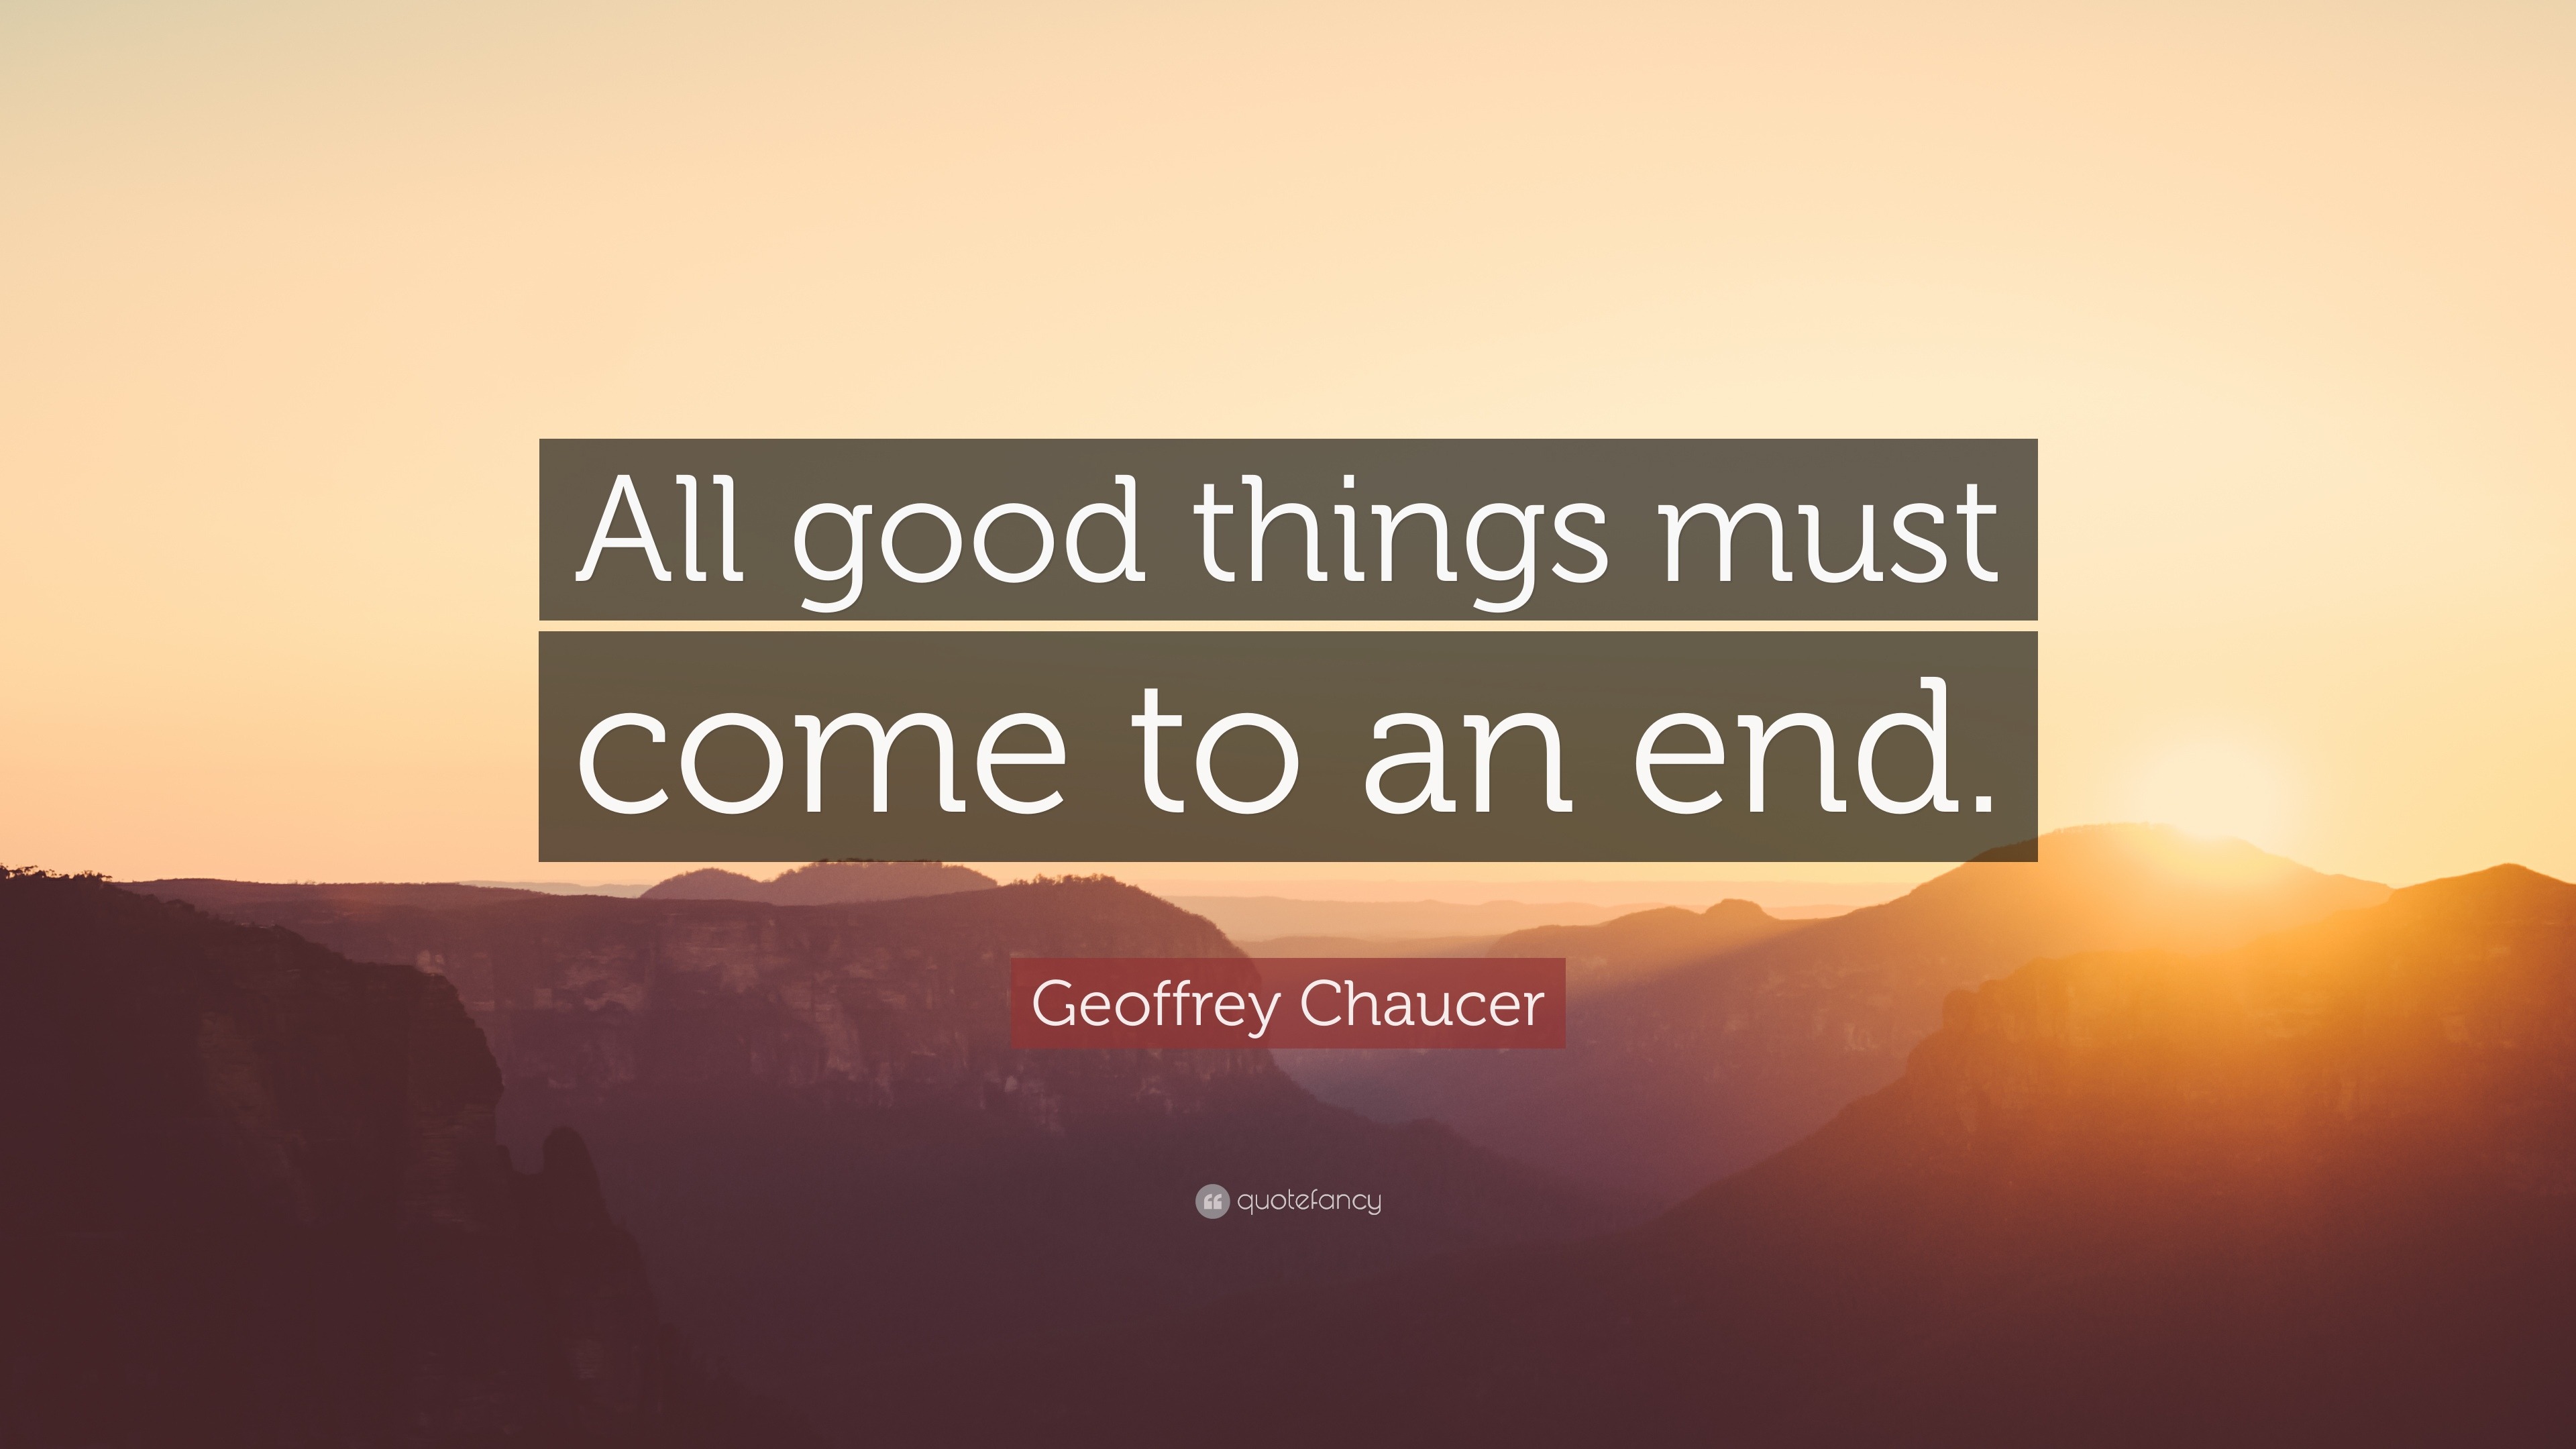 Geoffrey Chaucer Quote: “All good 